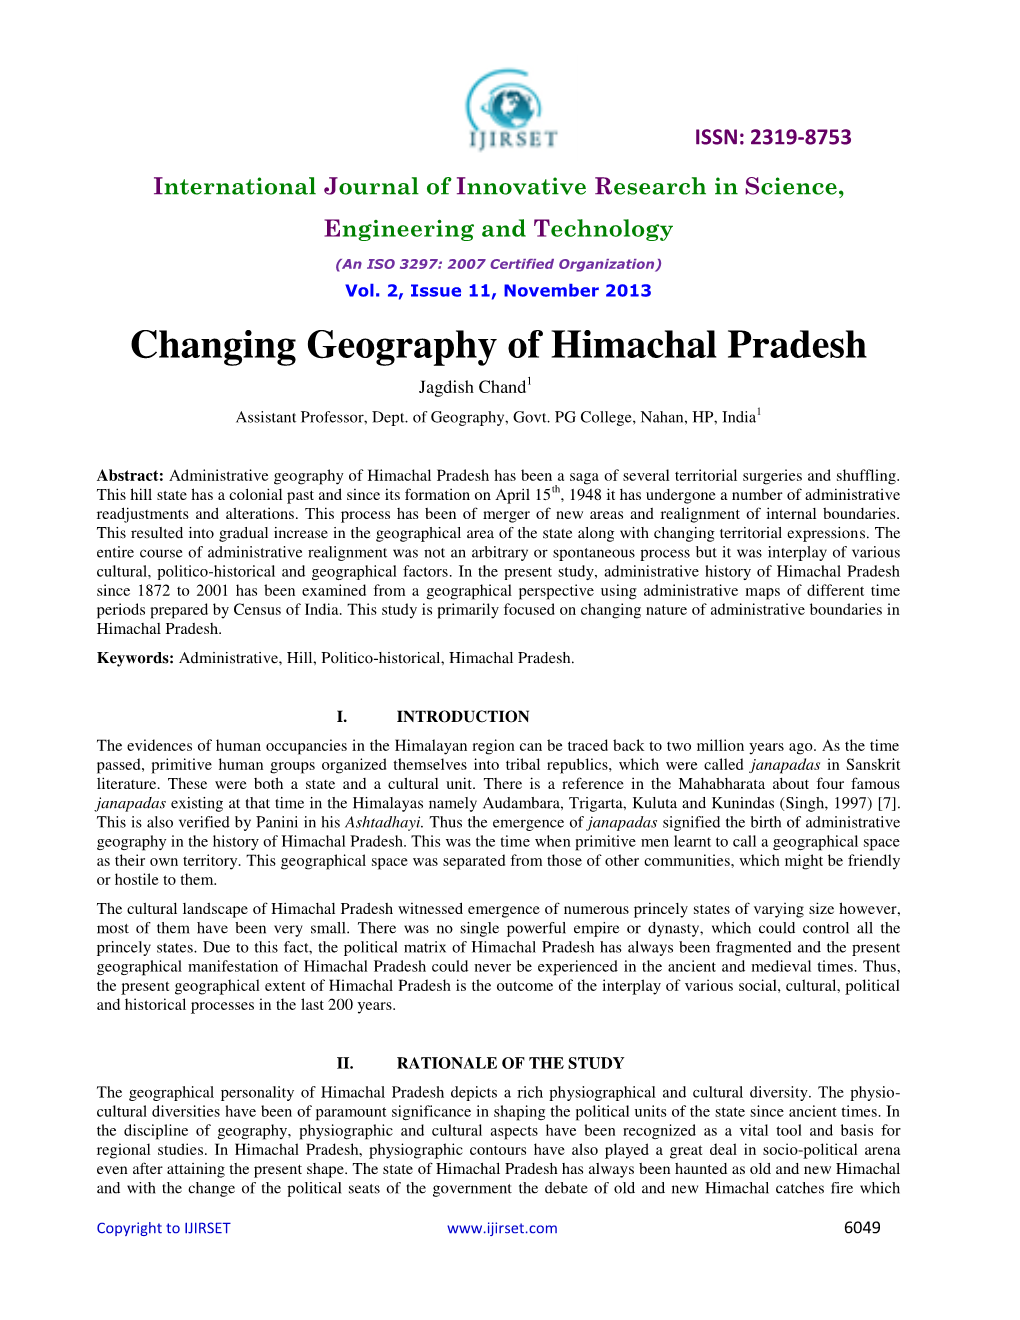 Changing Geography of Himachal Pradesh Jagdish Chand1 Assistant Professor, Dept